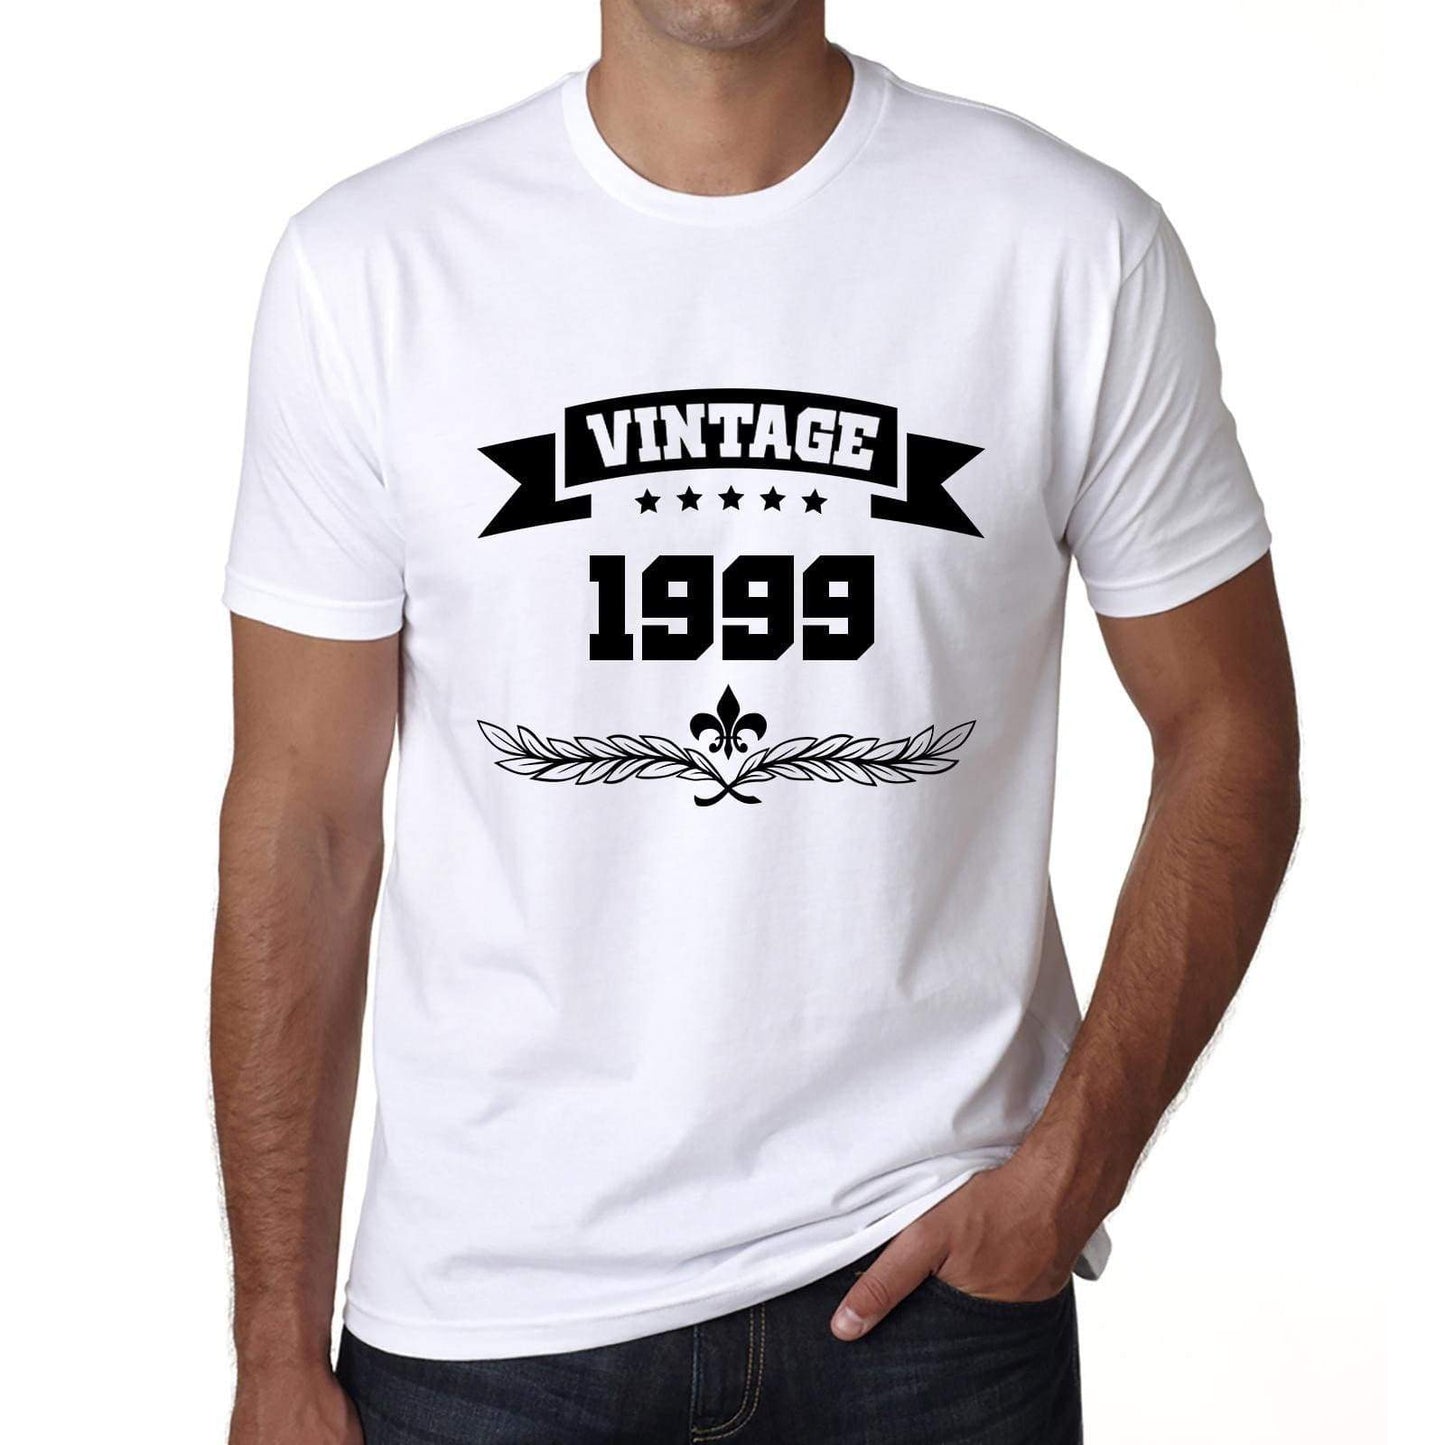 1999 Vintage Year White Mens Short Sleeve Round Neck T-Shirt 00096 - White / S - Casual